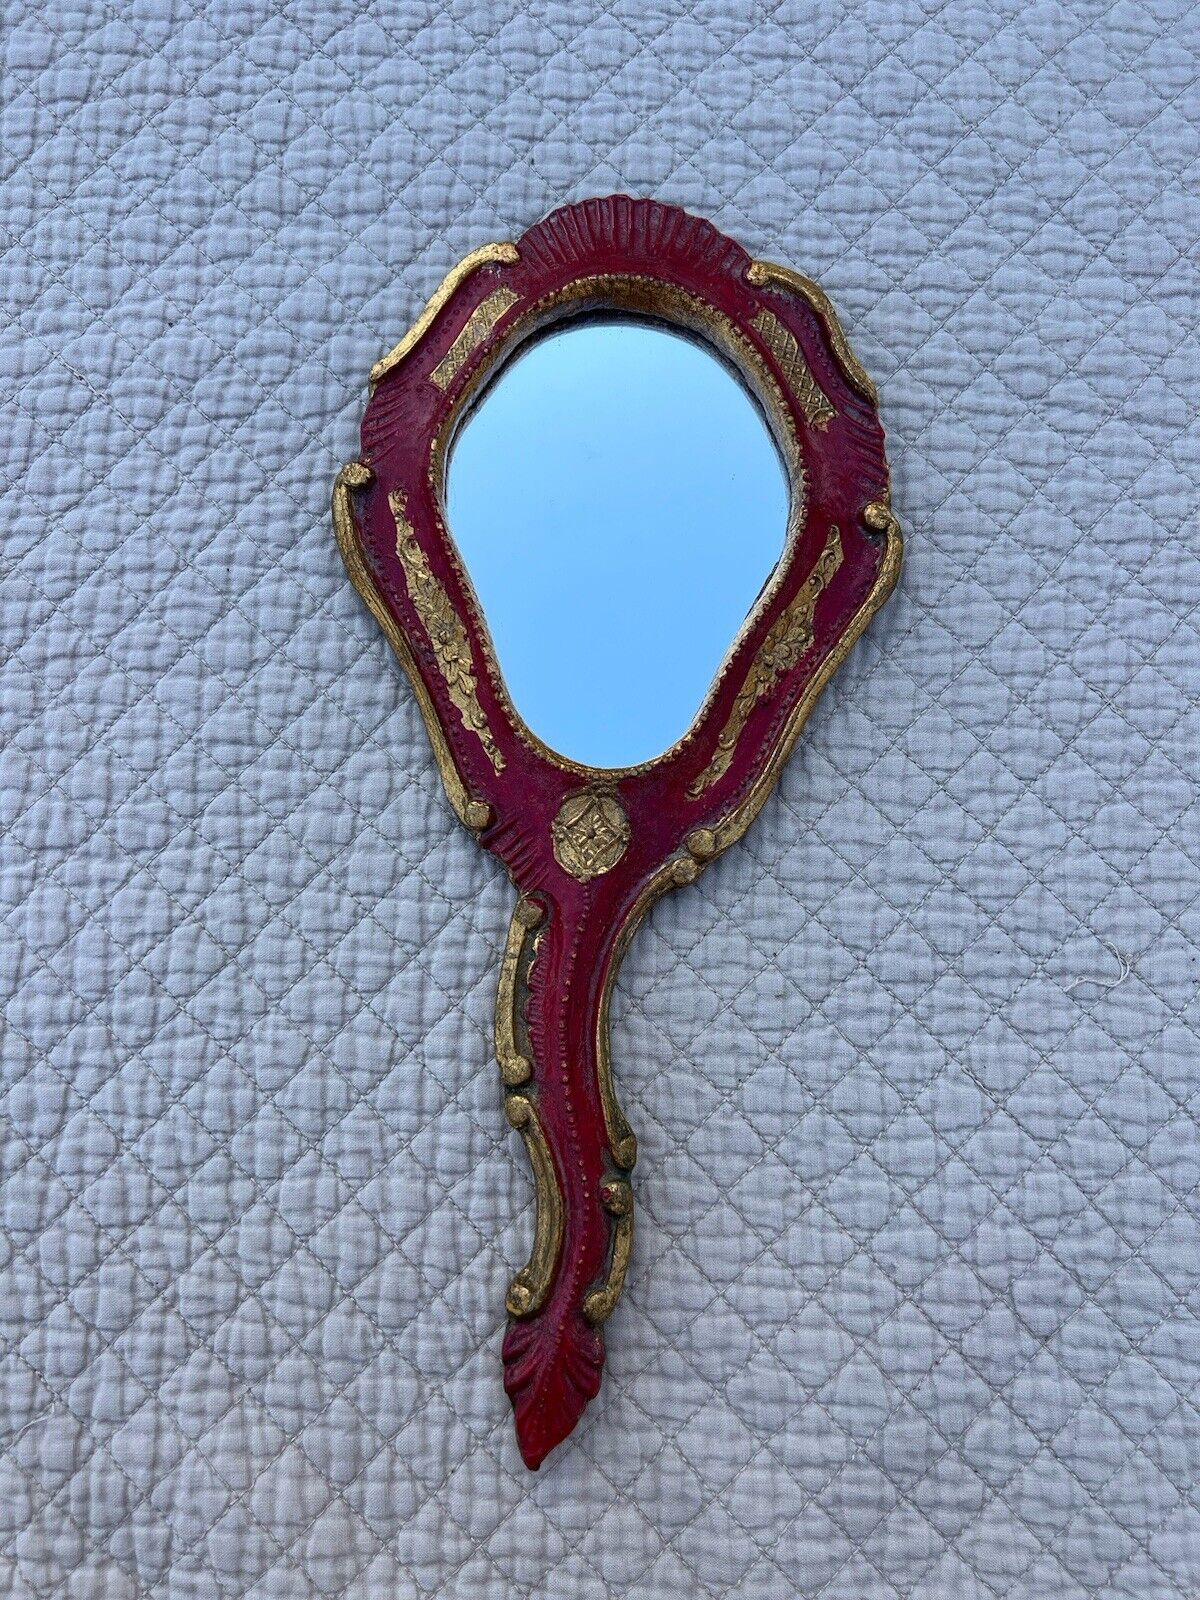 Vintage Italian Florentine Gilded Hand Mirror, Hand Painted Wood, Red and Gold